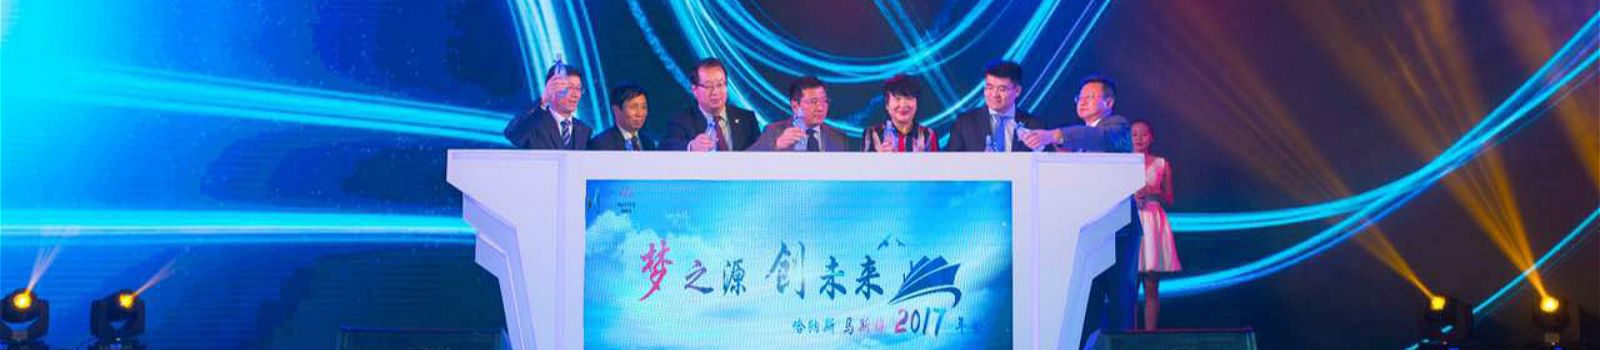 Annual Meetings for Master Group and Hanas Group in 2017